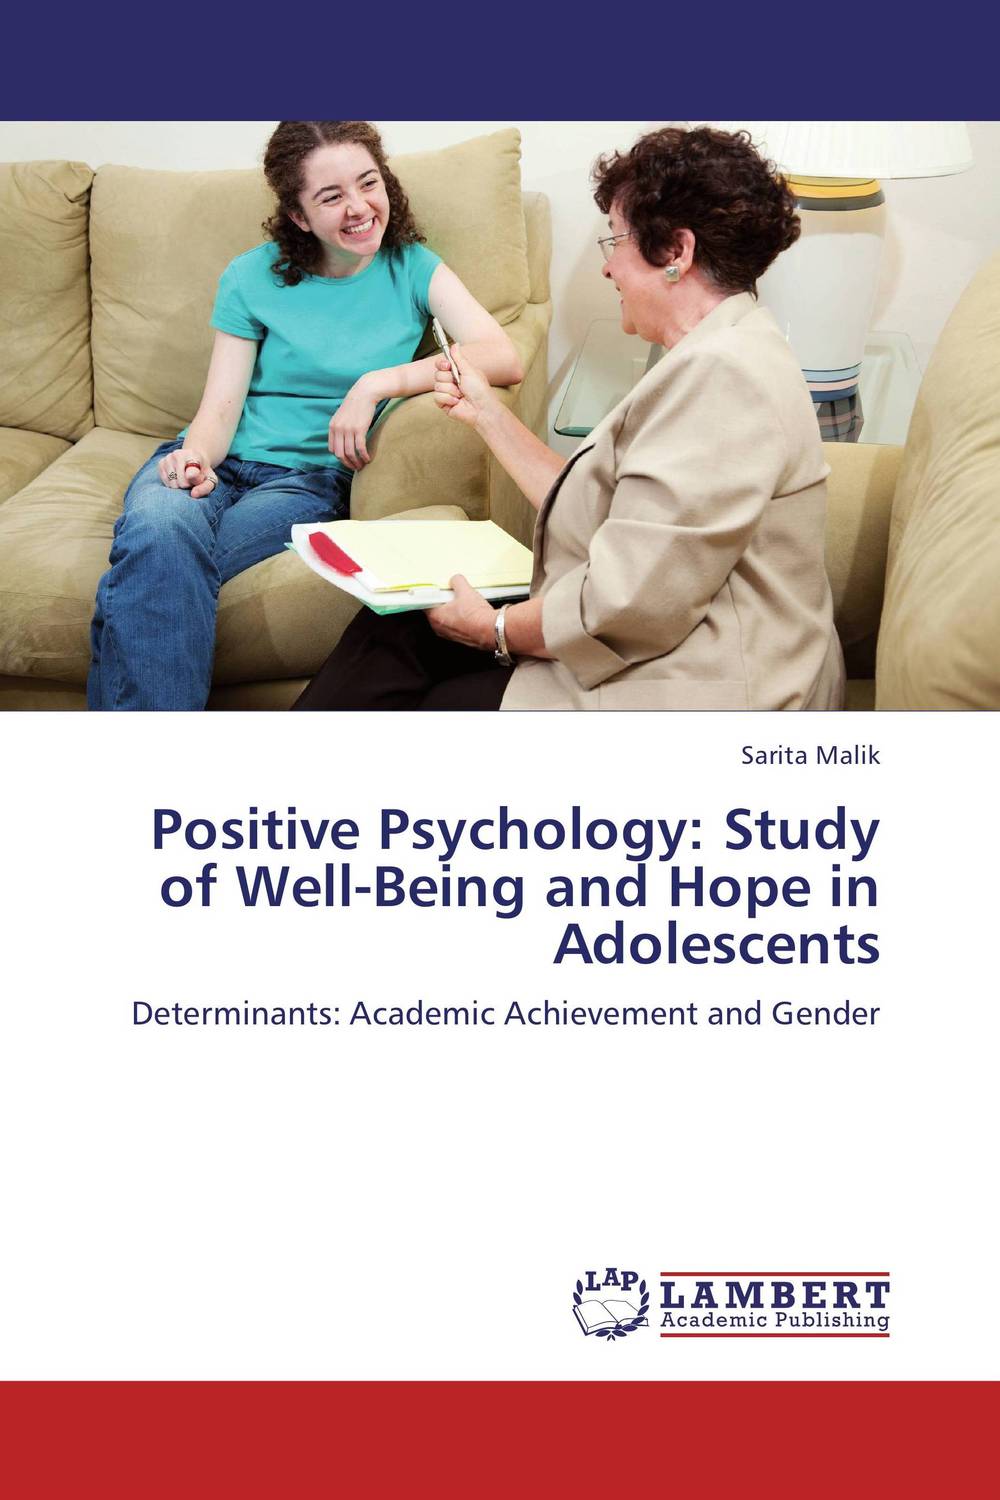 Positive Psychology: Study of Well-Being and Hope in Adolescents